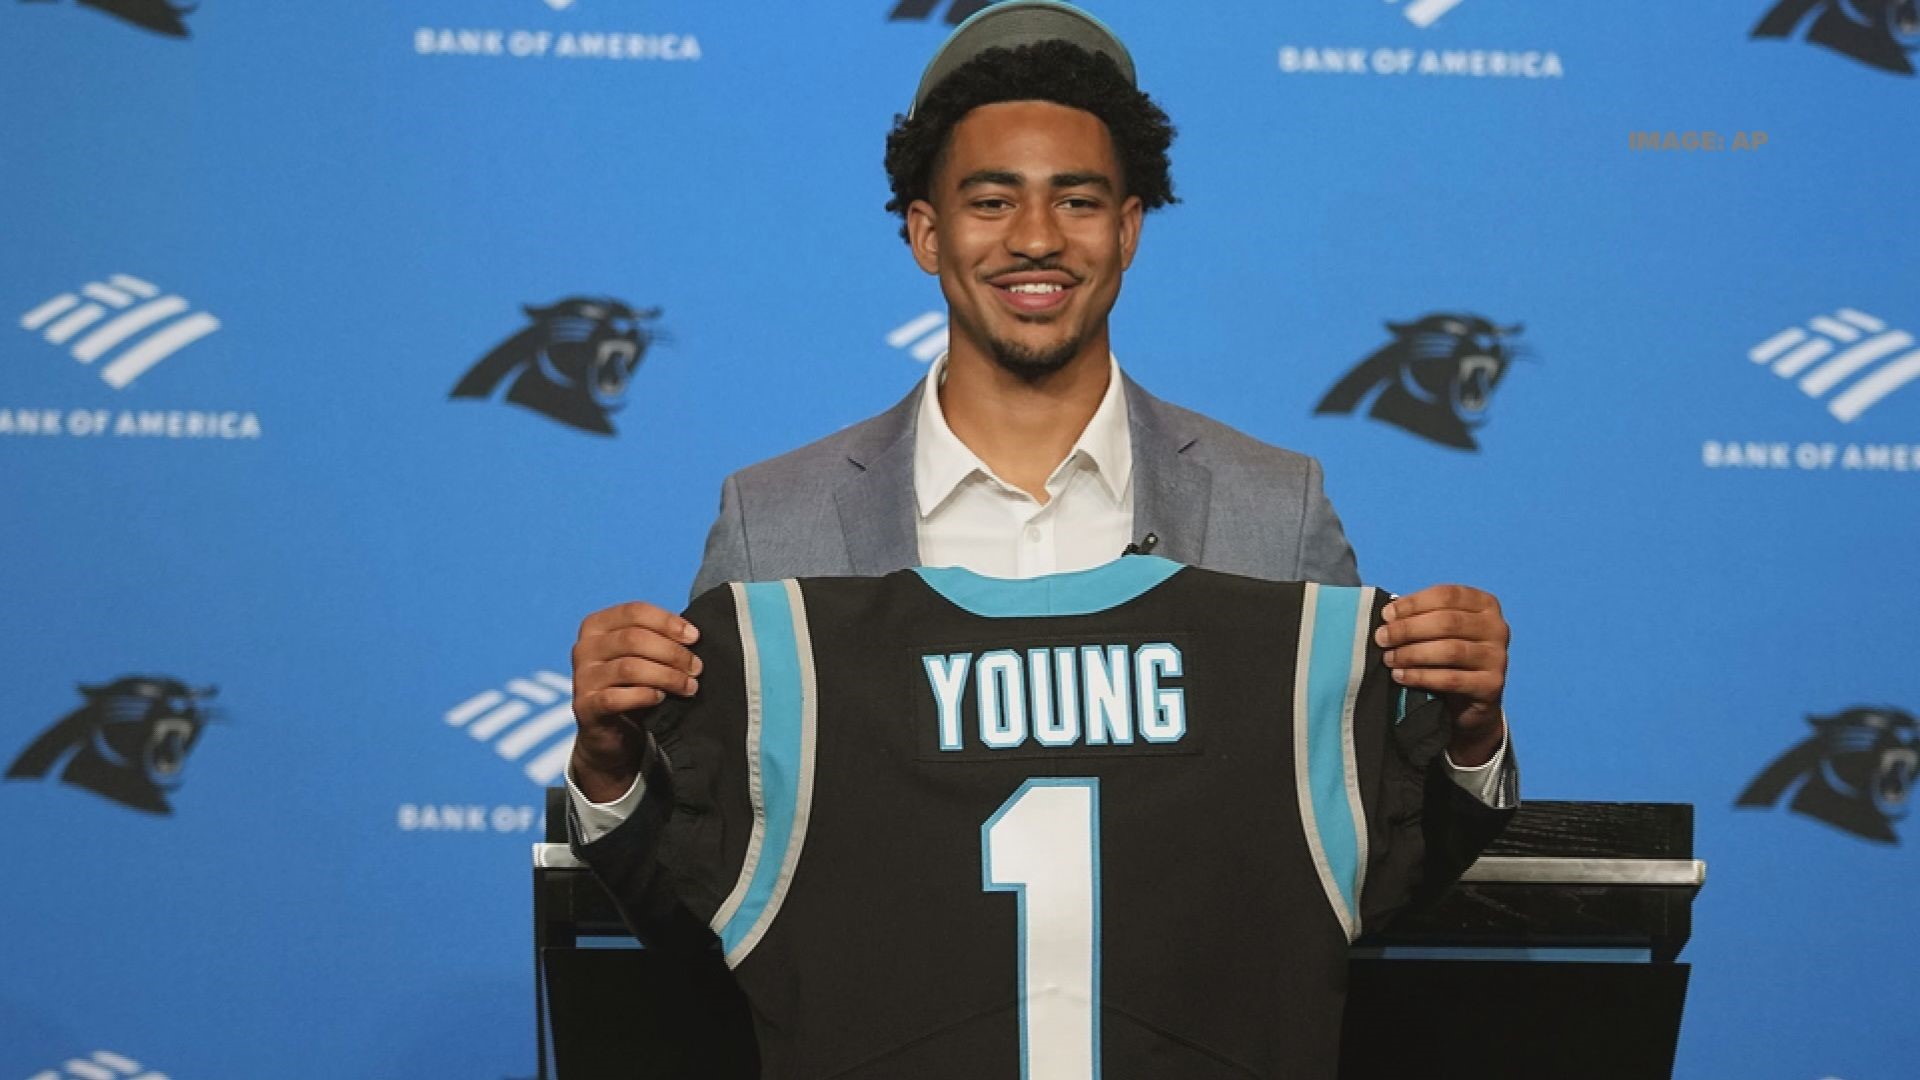 After some very rough seasons, the Carolina Panthers are laying the groundwork for the future. Bryce Young is their new quarterback.